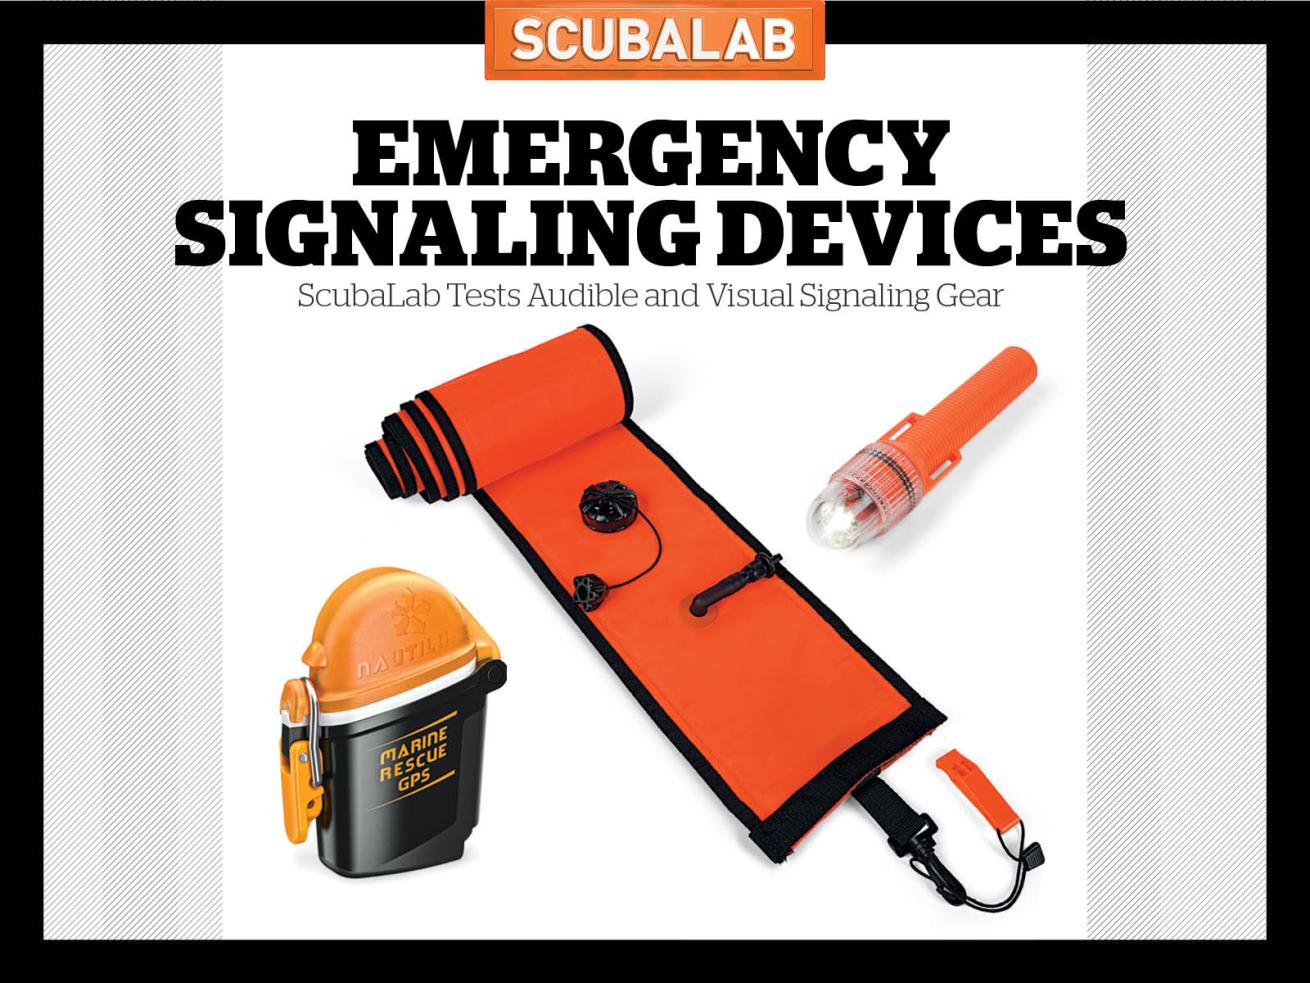 ScubaLab 2017 Audible and Visual Signaling Devices Gear For Scuba Diving